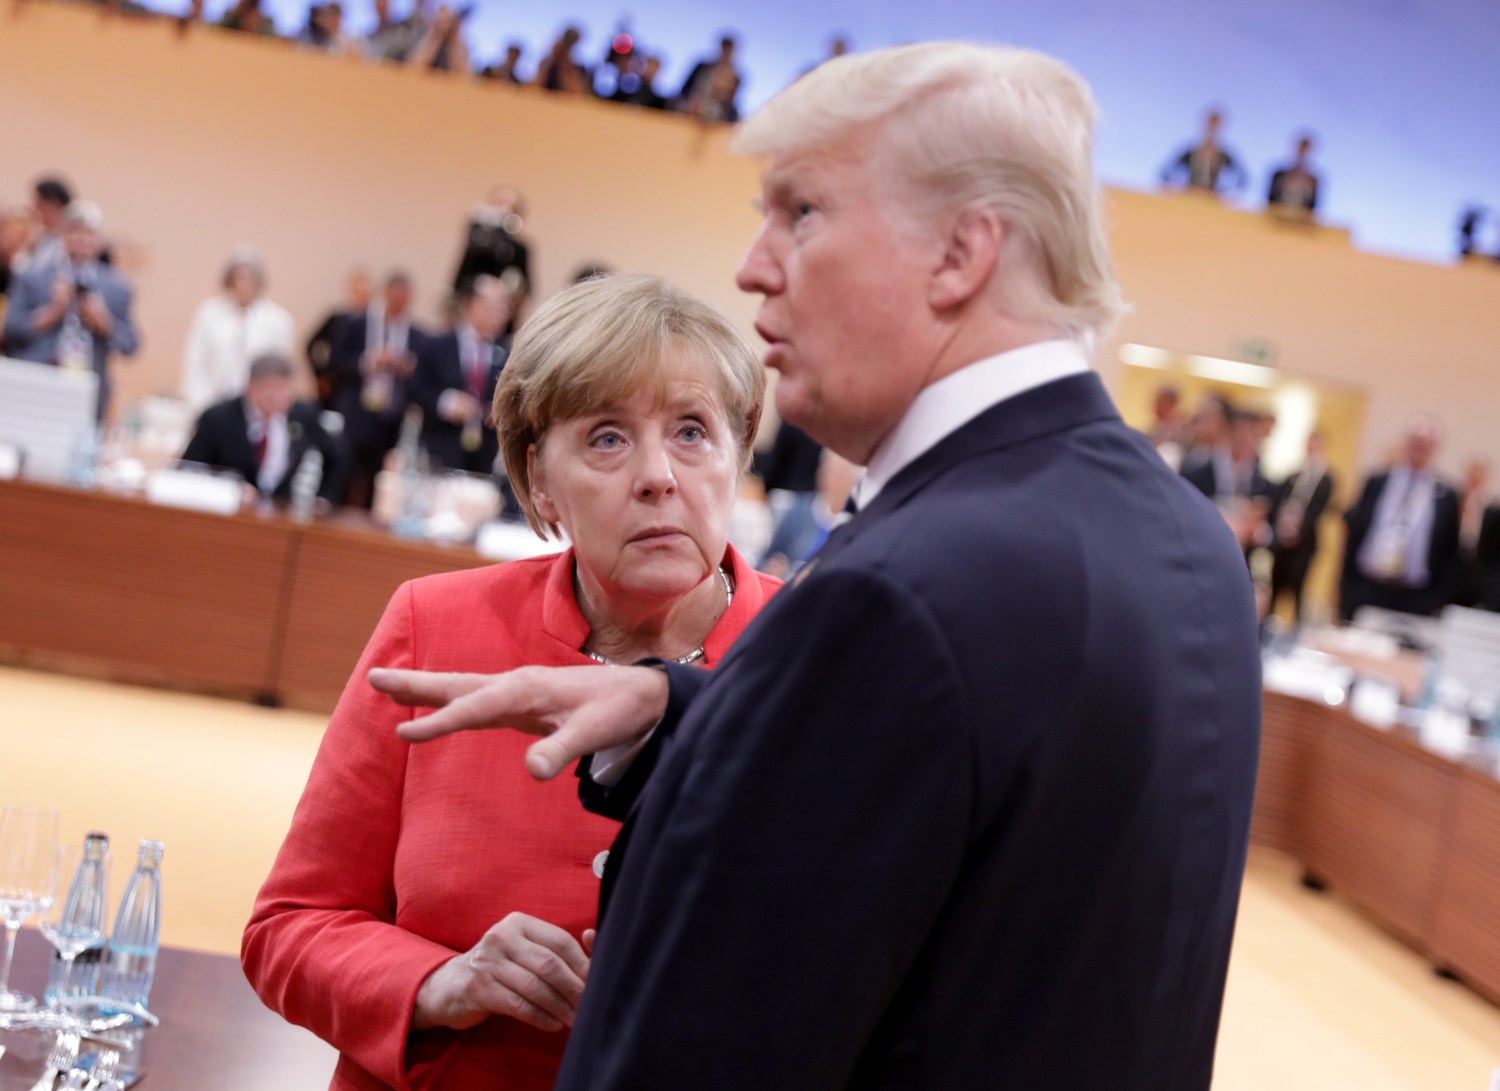 U.S. President Donald Trump talks to German Chancellor Angela Merkel before the first working session of the G20 meeting in Hamburg, Germany, July 7, 2017. REUTERS/Kay Nietfeld,Pool - RC1C9C45A9E0